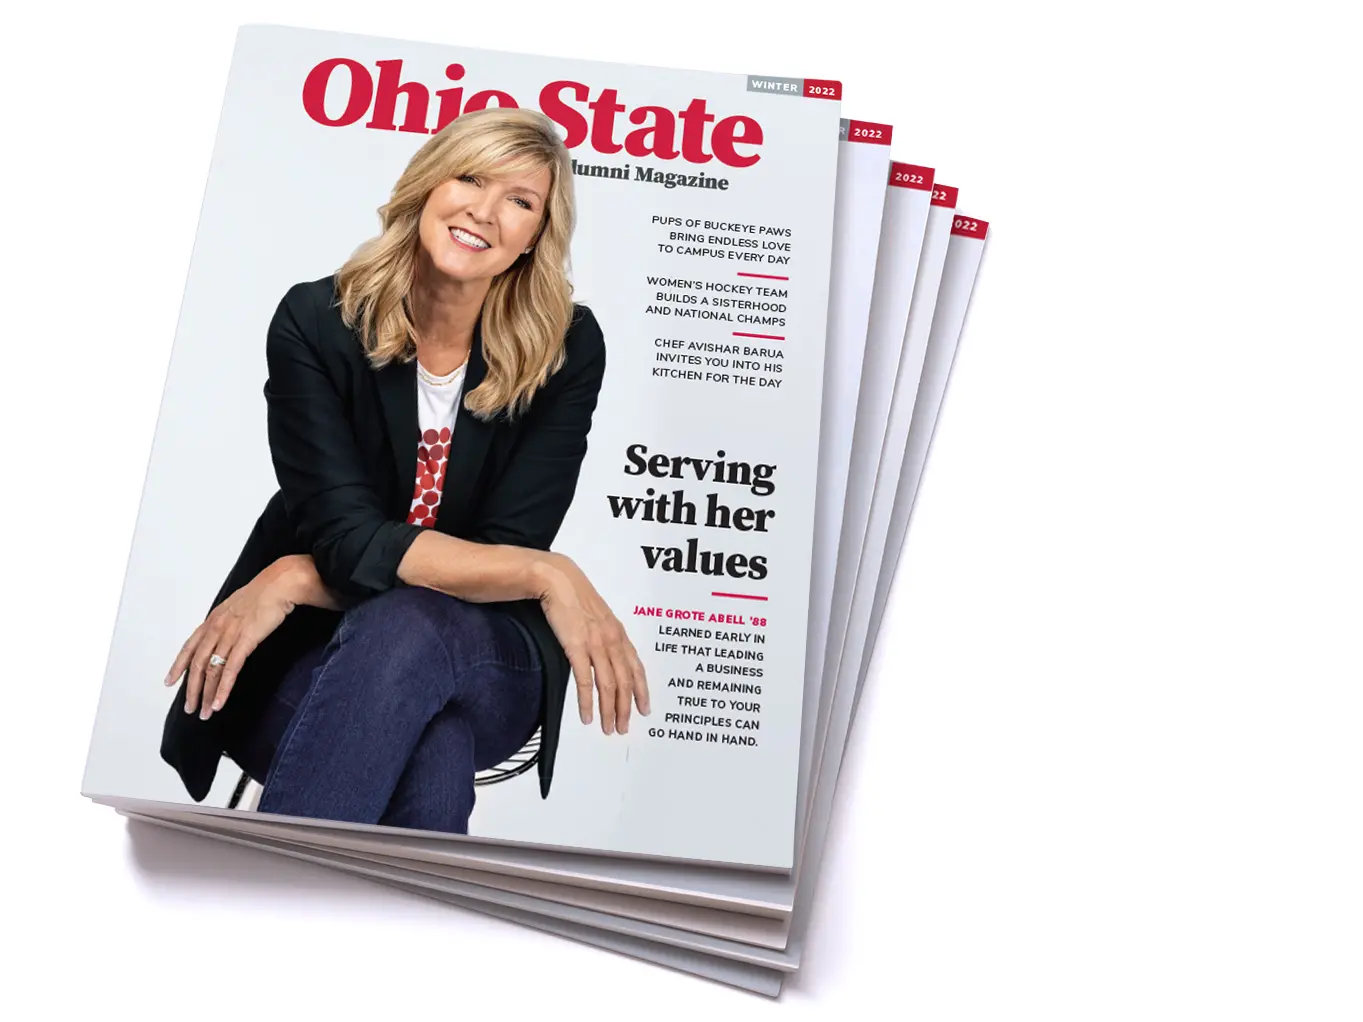 A stack of Ohio State Alumni Magazines show a smiling Jane Grote Abell sitting on a chair on the cover.